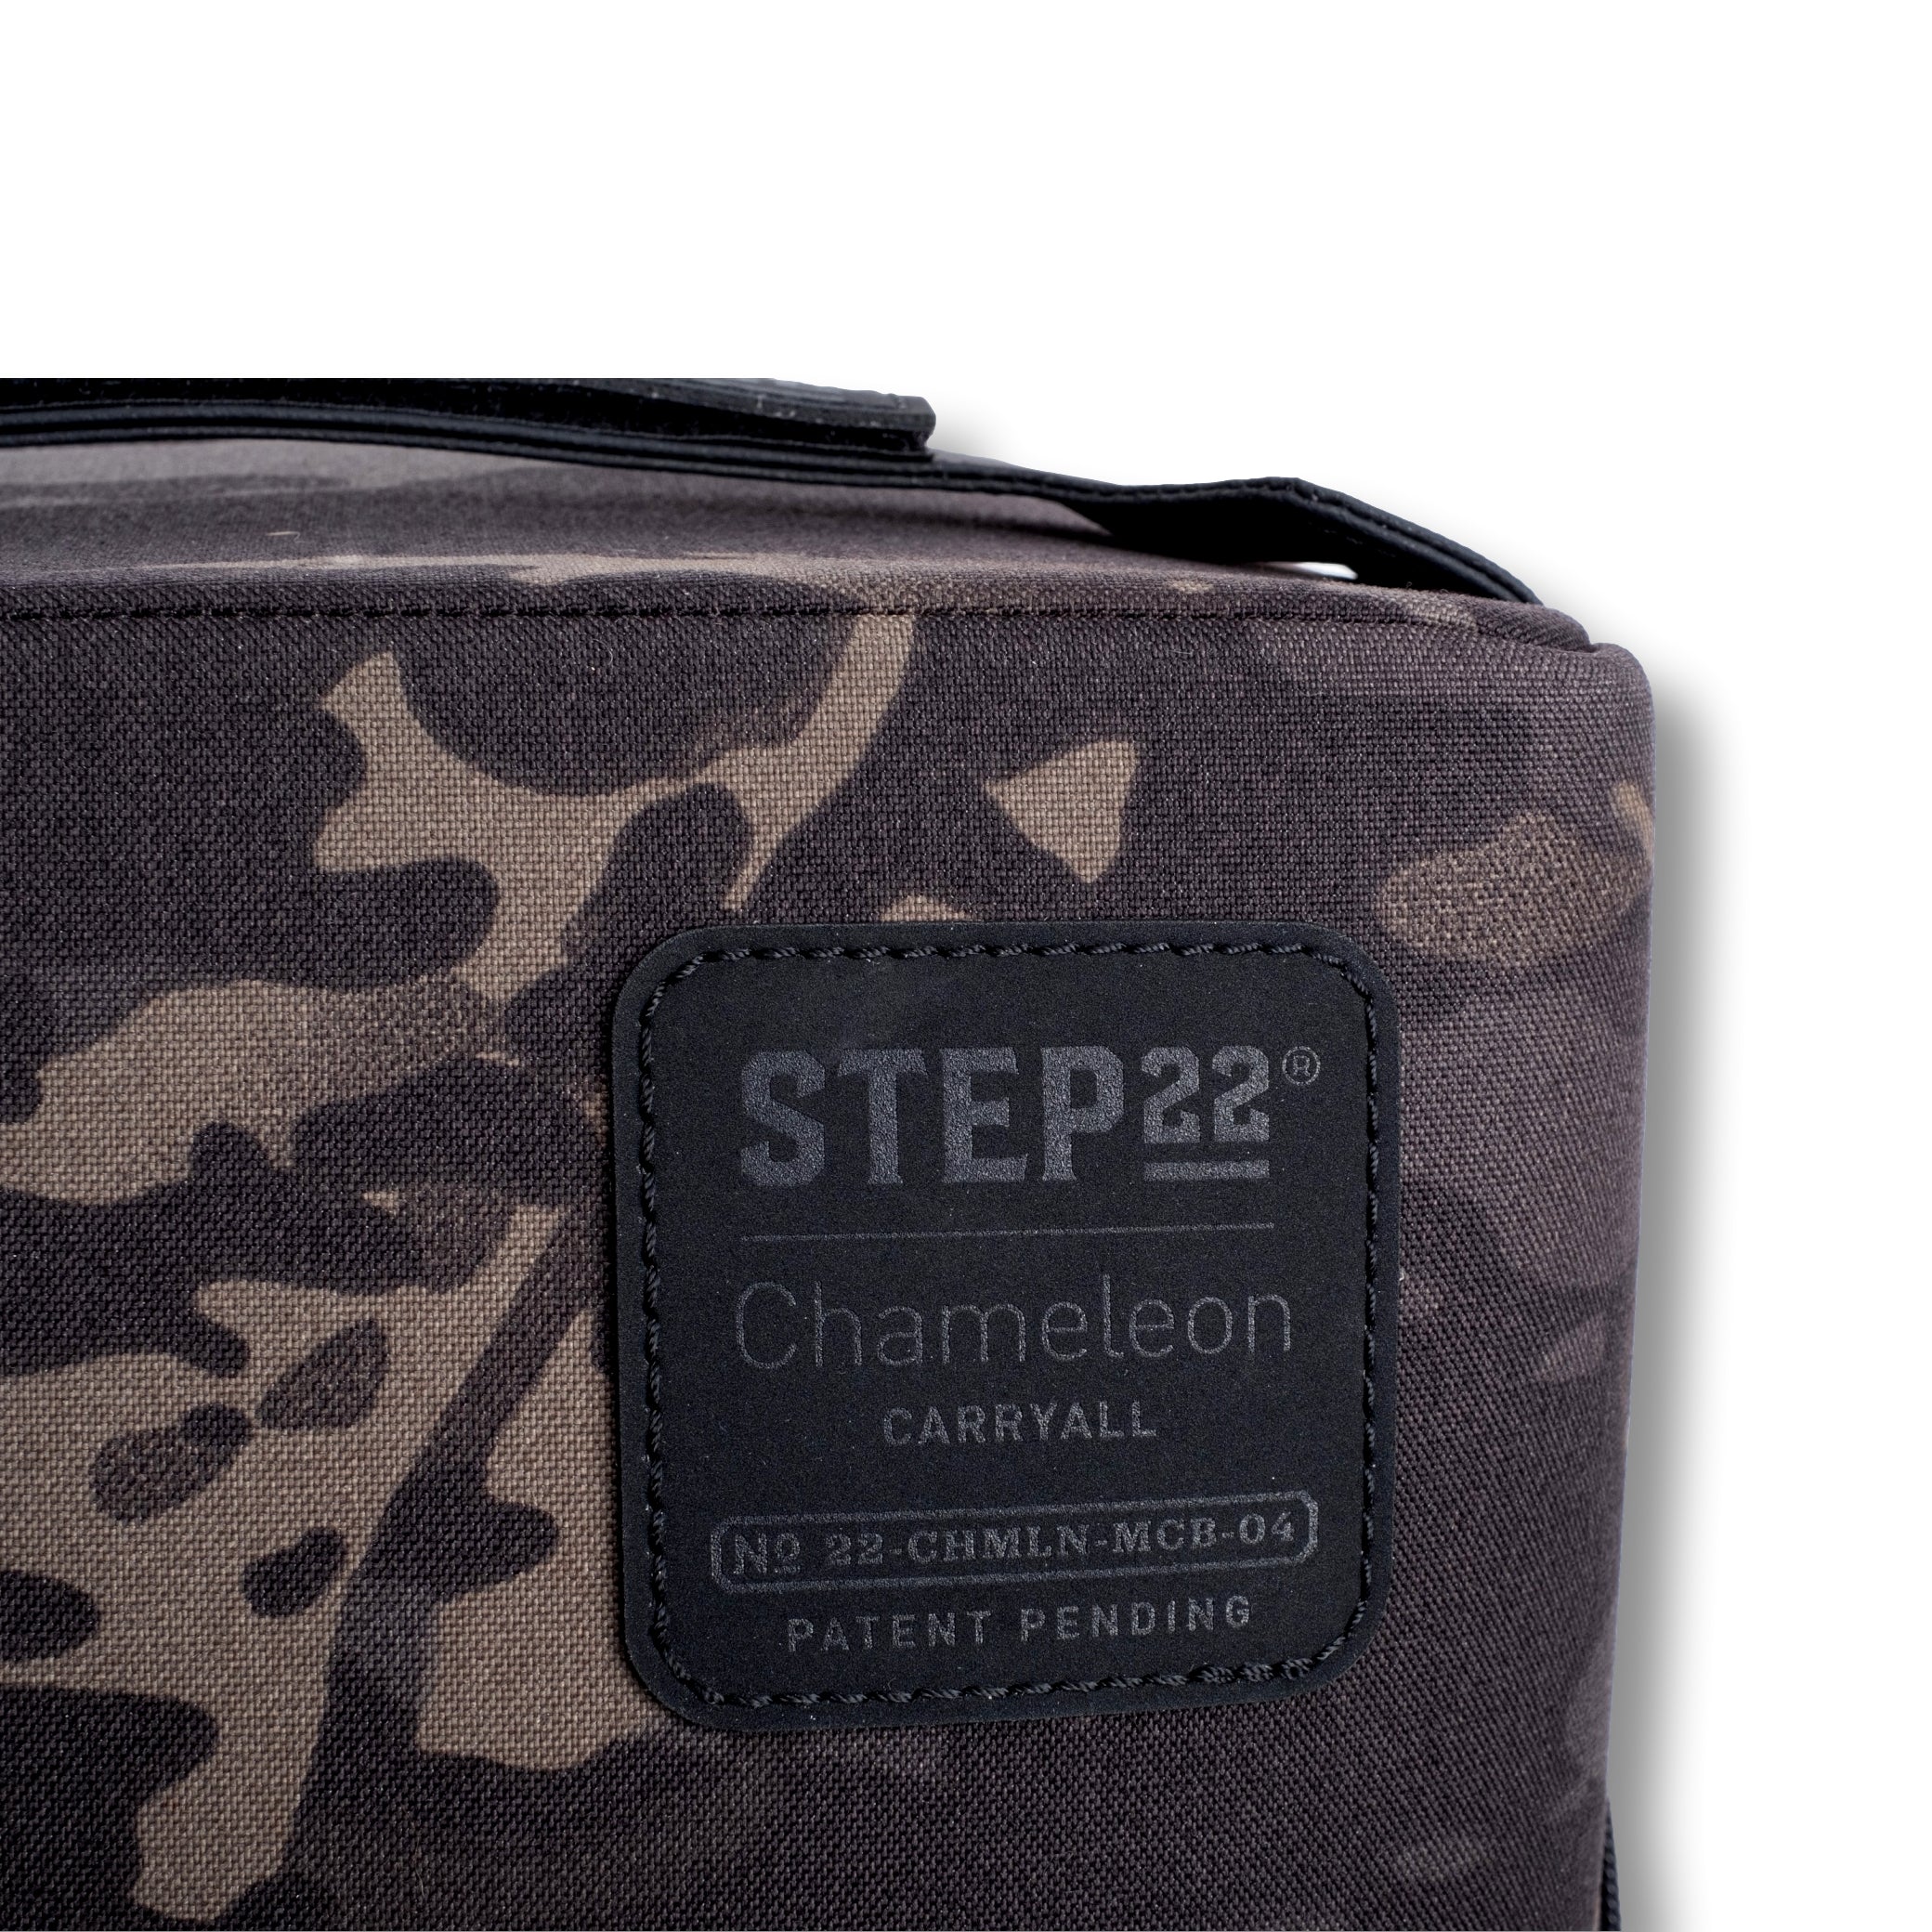 Step22 Chameleon™ Carryall with REEF Panel